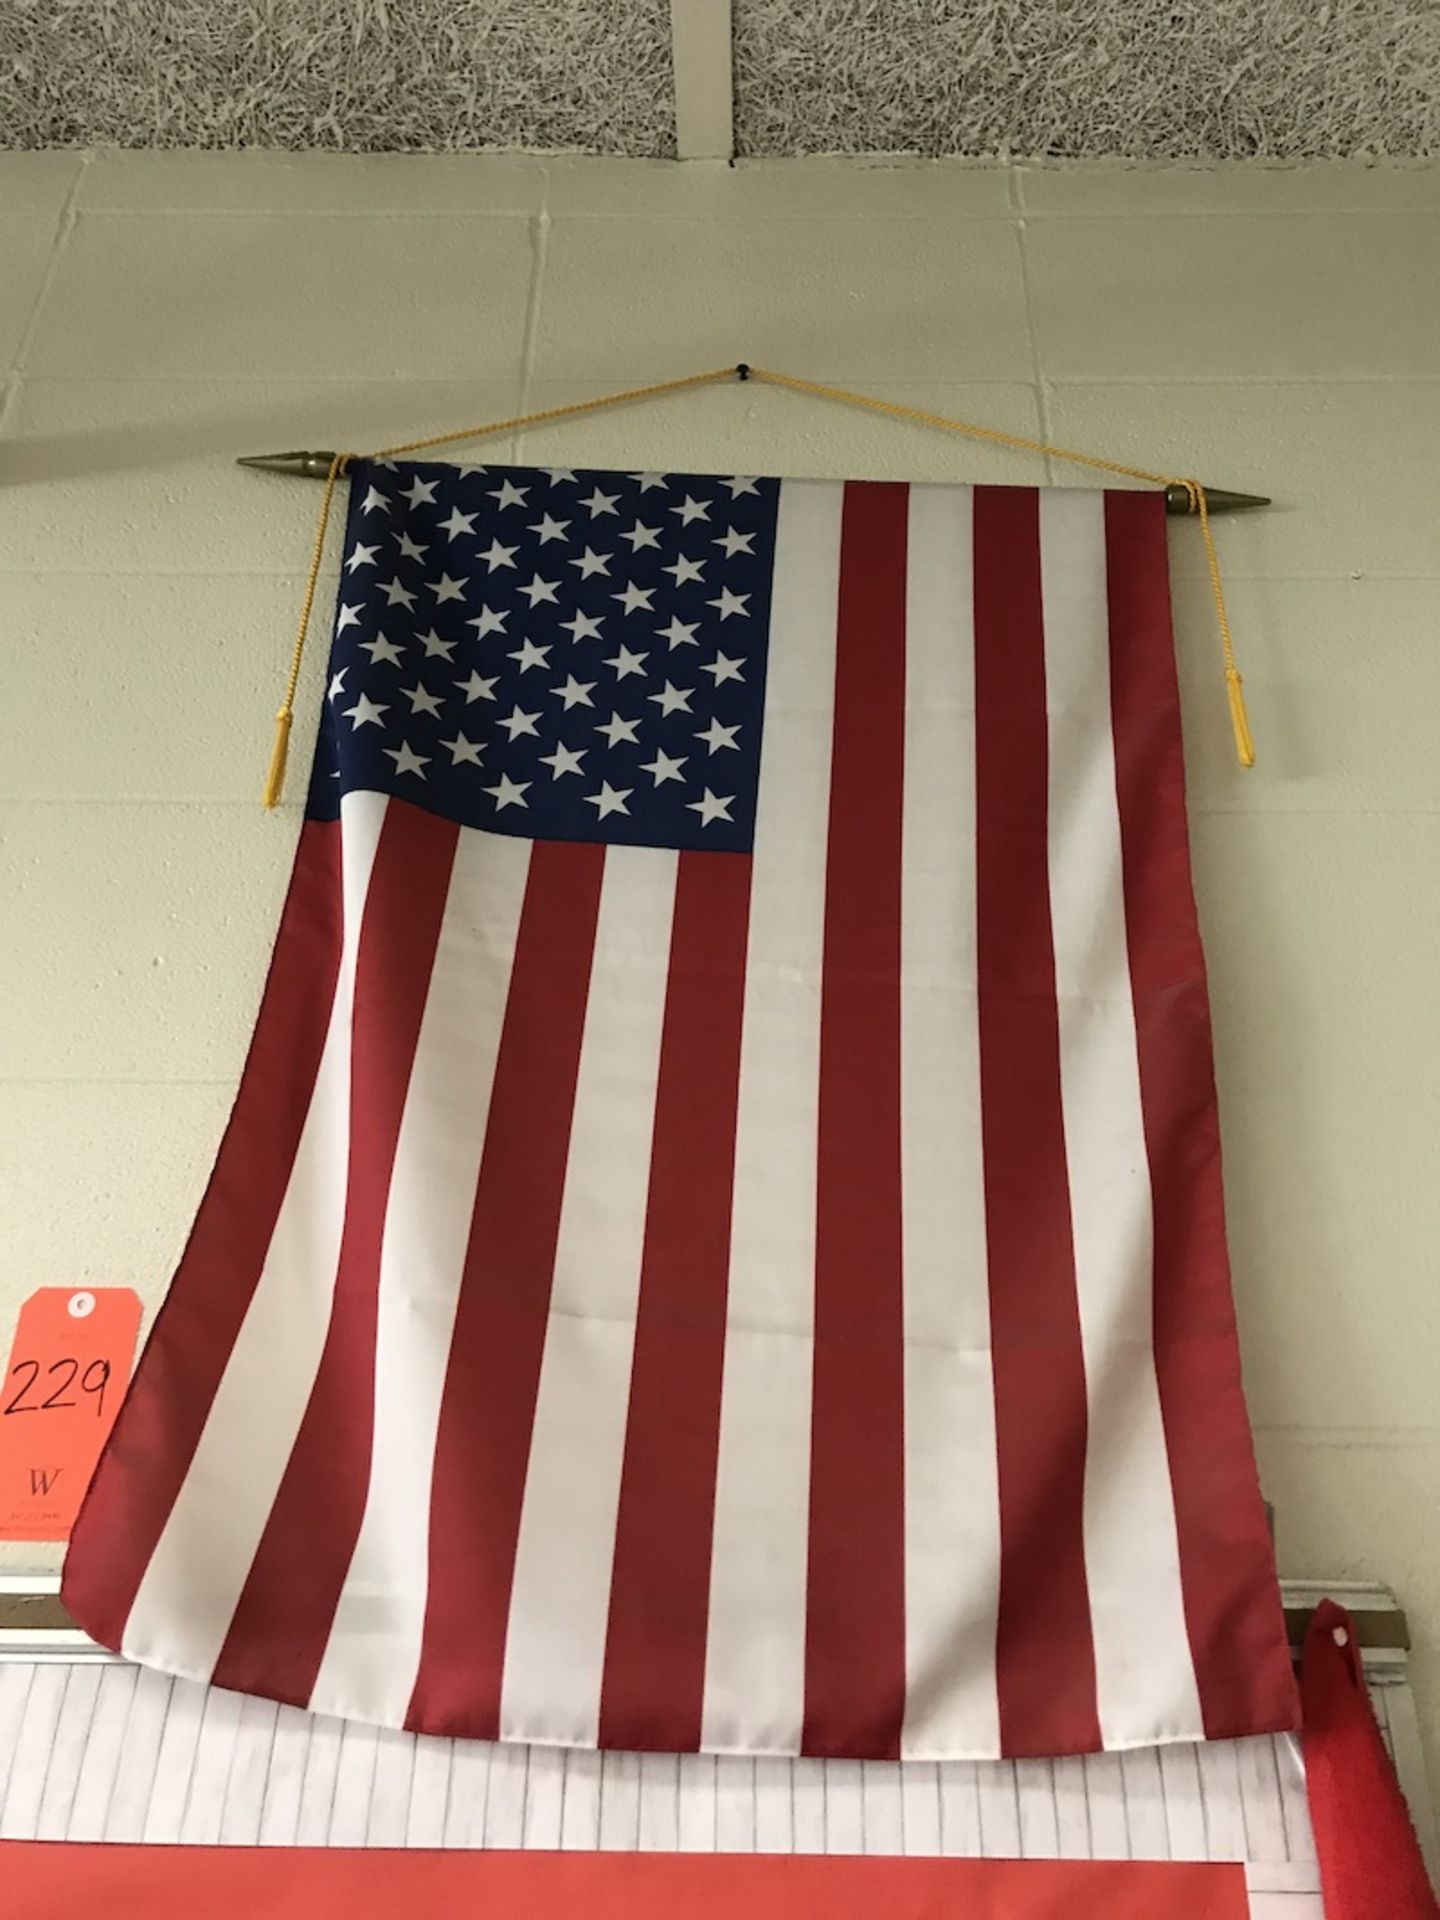 Lot - (1) American Flag (1) Wall Clock (1) Projection Screen (Room 201)